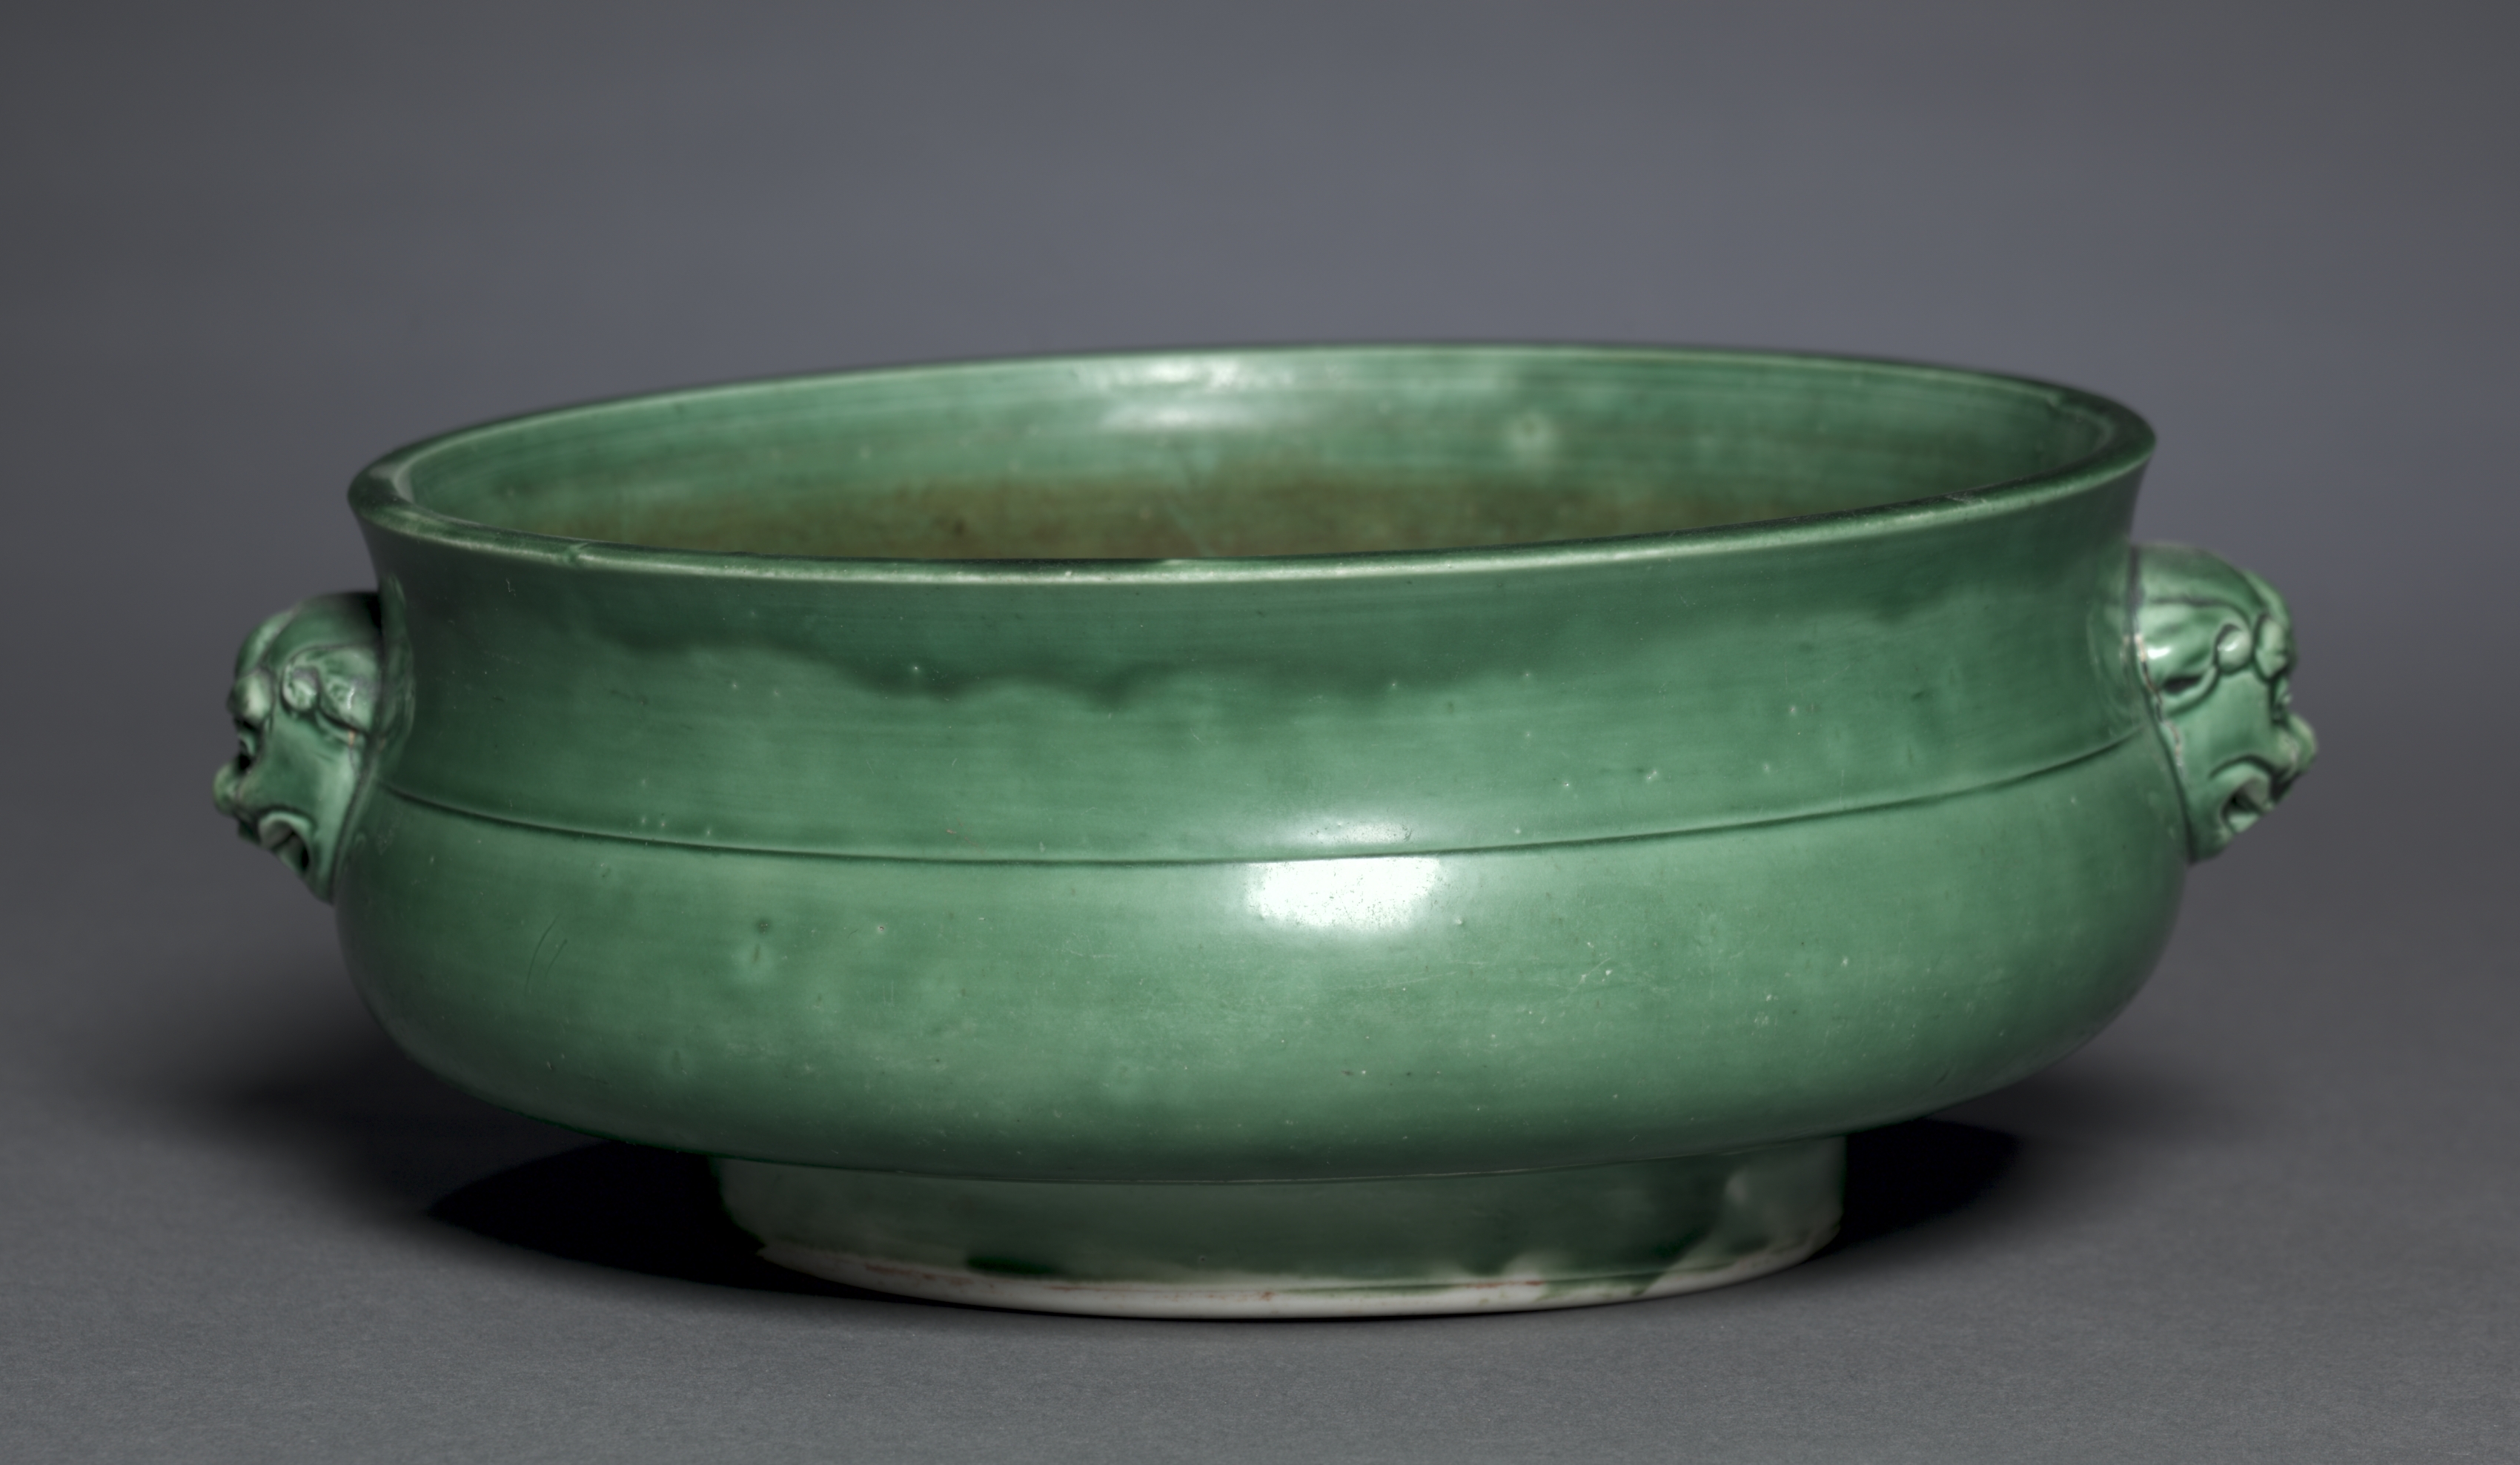 Bowl in Form of Archaic Gui